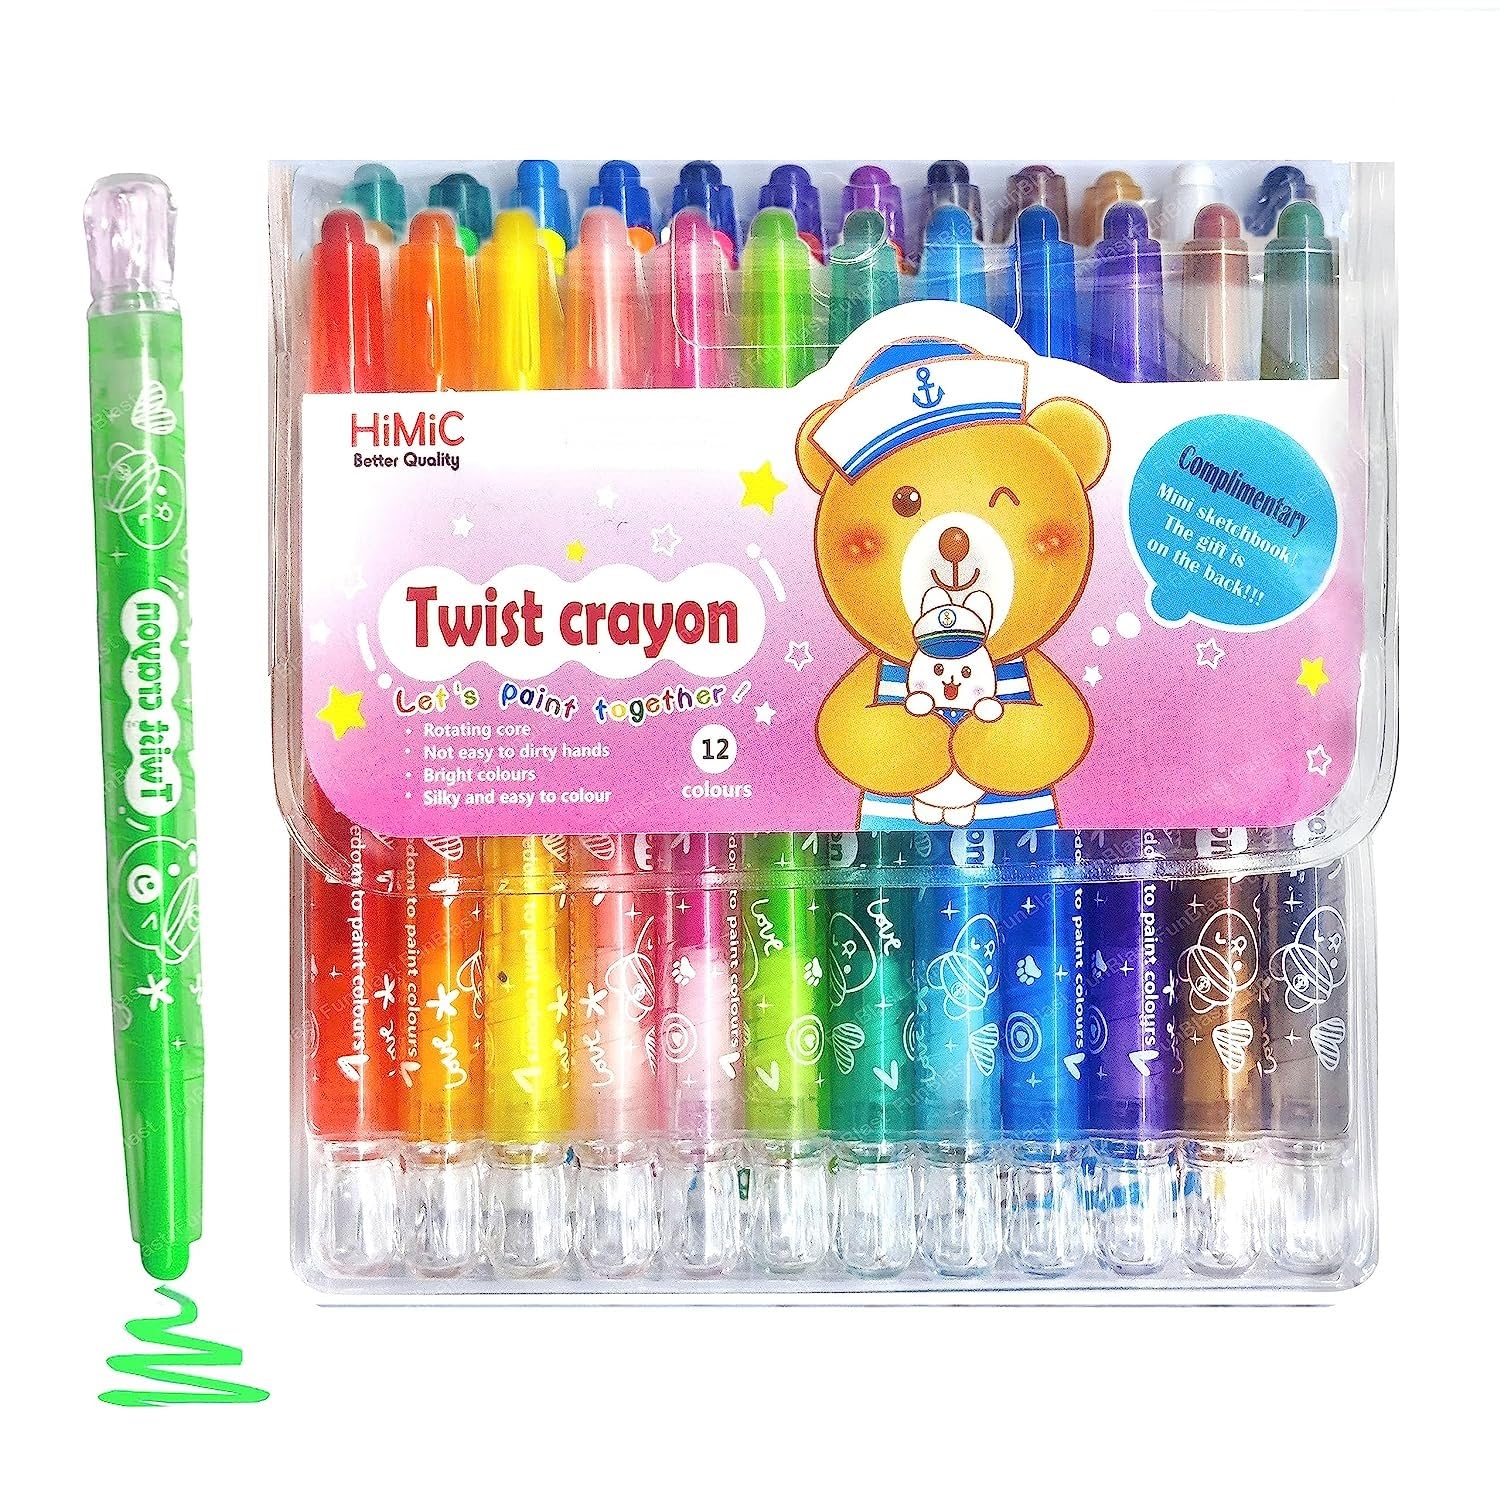 Twist Crayons For Kids - 24 Pcs Crayon Set For Kids, Coloring Kit For